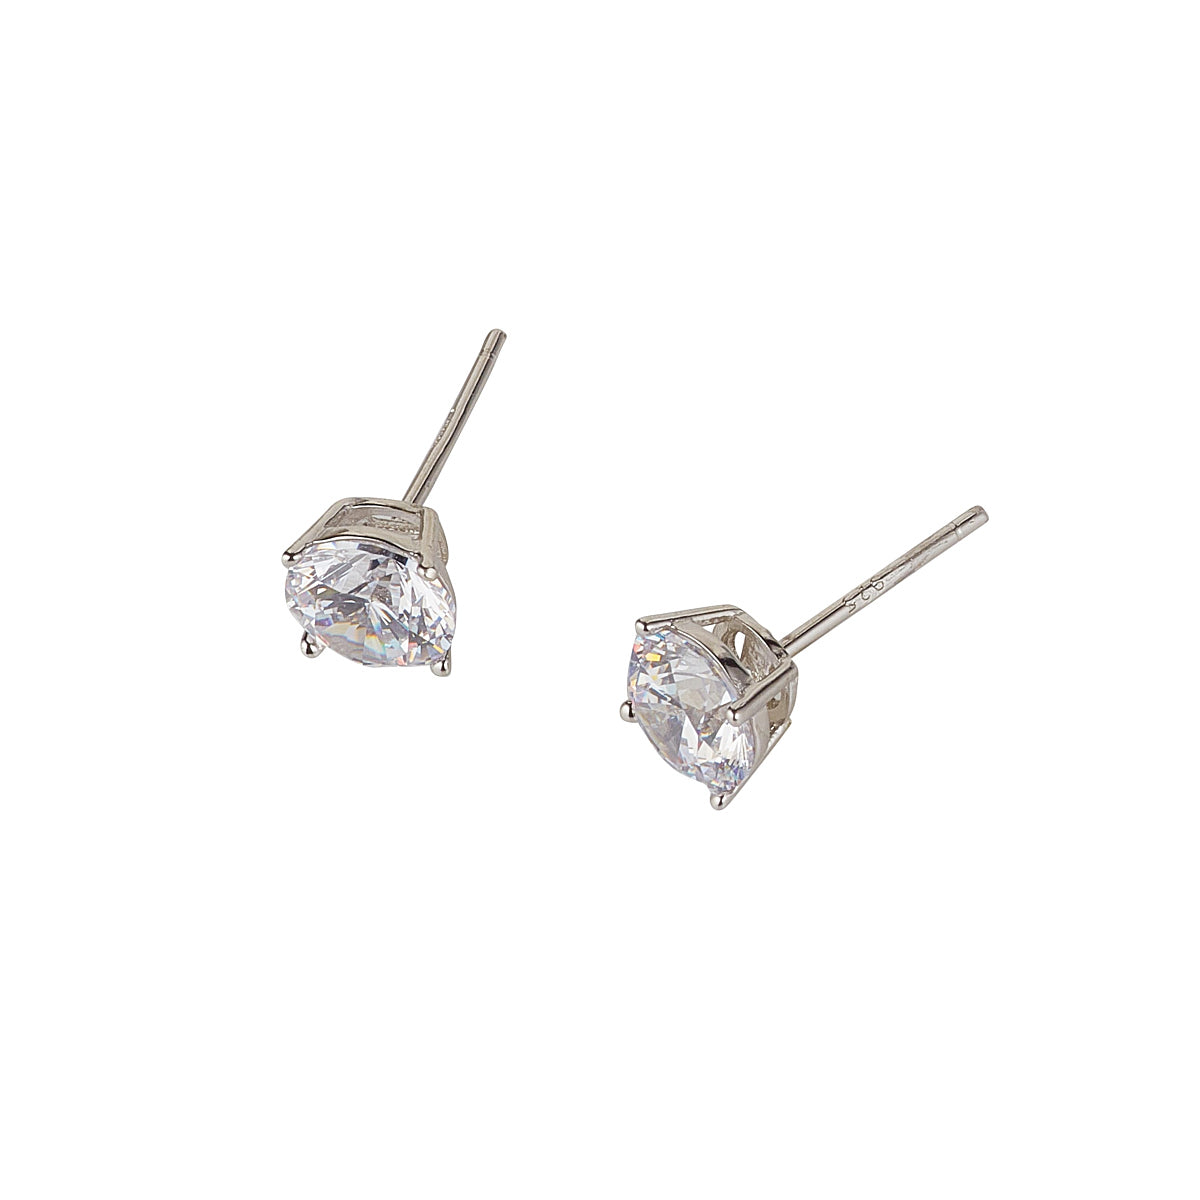 Sterling Silver 6mm Round Solitaire CZ Stud Earrings